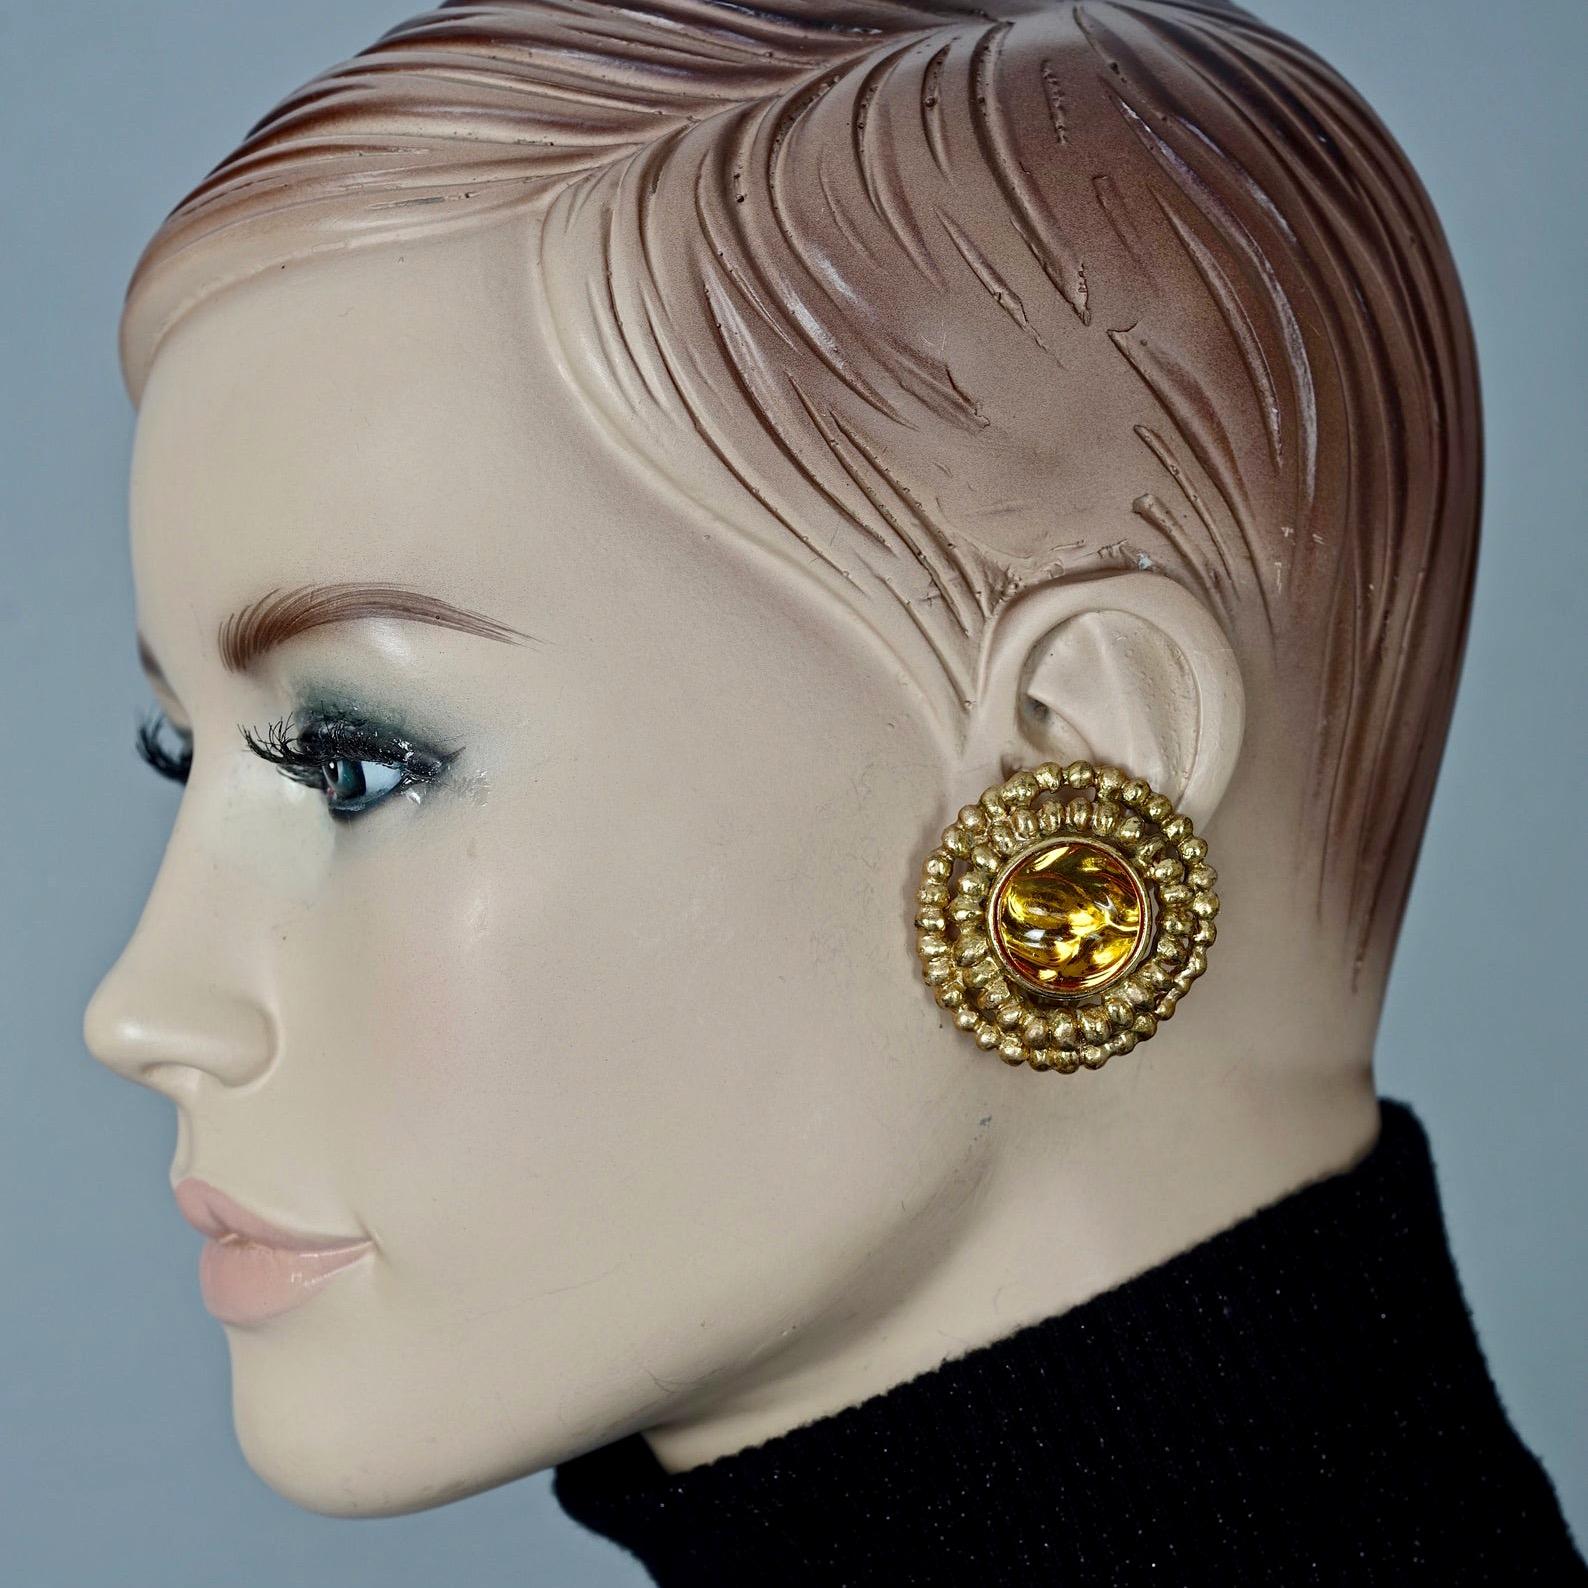 Vintage YVES SAINT LAURENT Ysl Amber Cabochon Disc Medallion Earrings

Measurements:
Height: 1.57 inches (4 cm)
Width: 1.49 inches (3.8 cm)
Weight per Earring: 18 grams

Features:
- 100% Authentic YVES SAINT LAURENT.
- Dramatic irregular depth